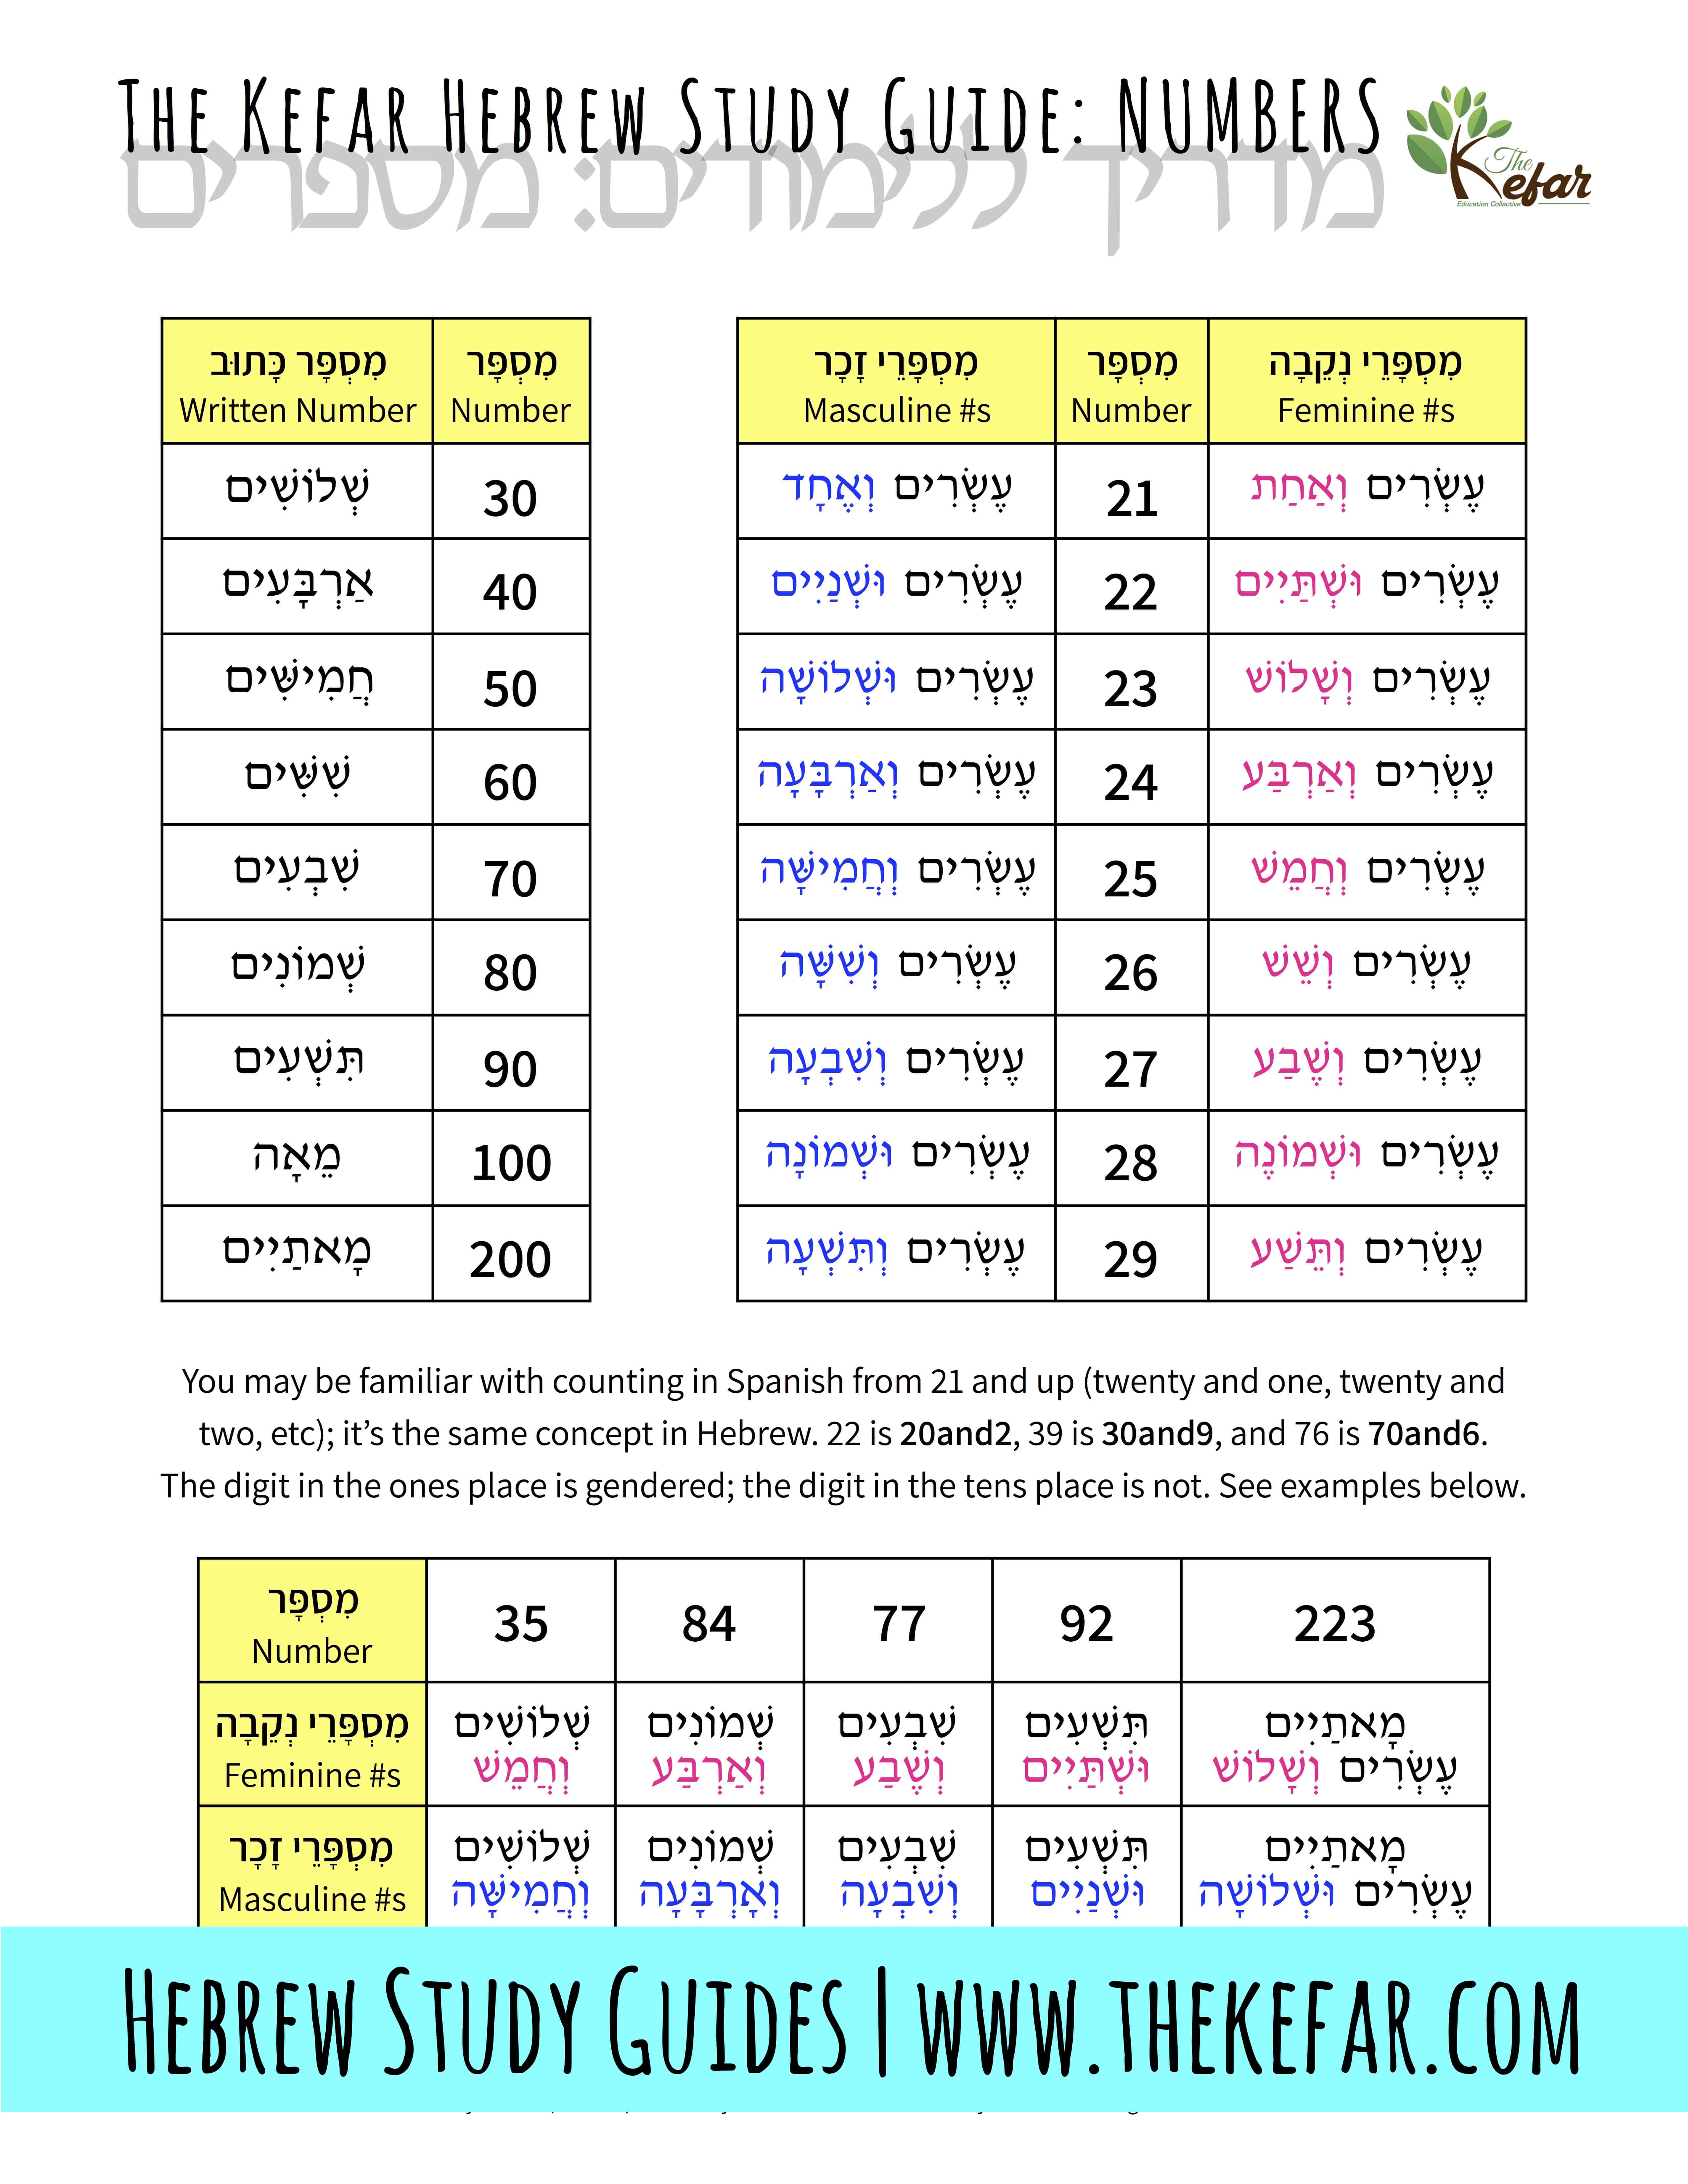 Picture of The Kefar Hebrew Study Guide for numbers. There are tables showing numbers 21-29, and 30, 40, 50, 60, 70, 80, 90, 100, and 200 written in Hebrew, and explanatory text below the tables. Created by T'helah Ben-Dan for The Kefar